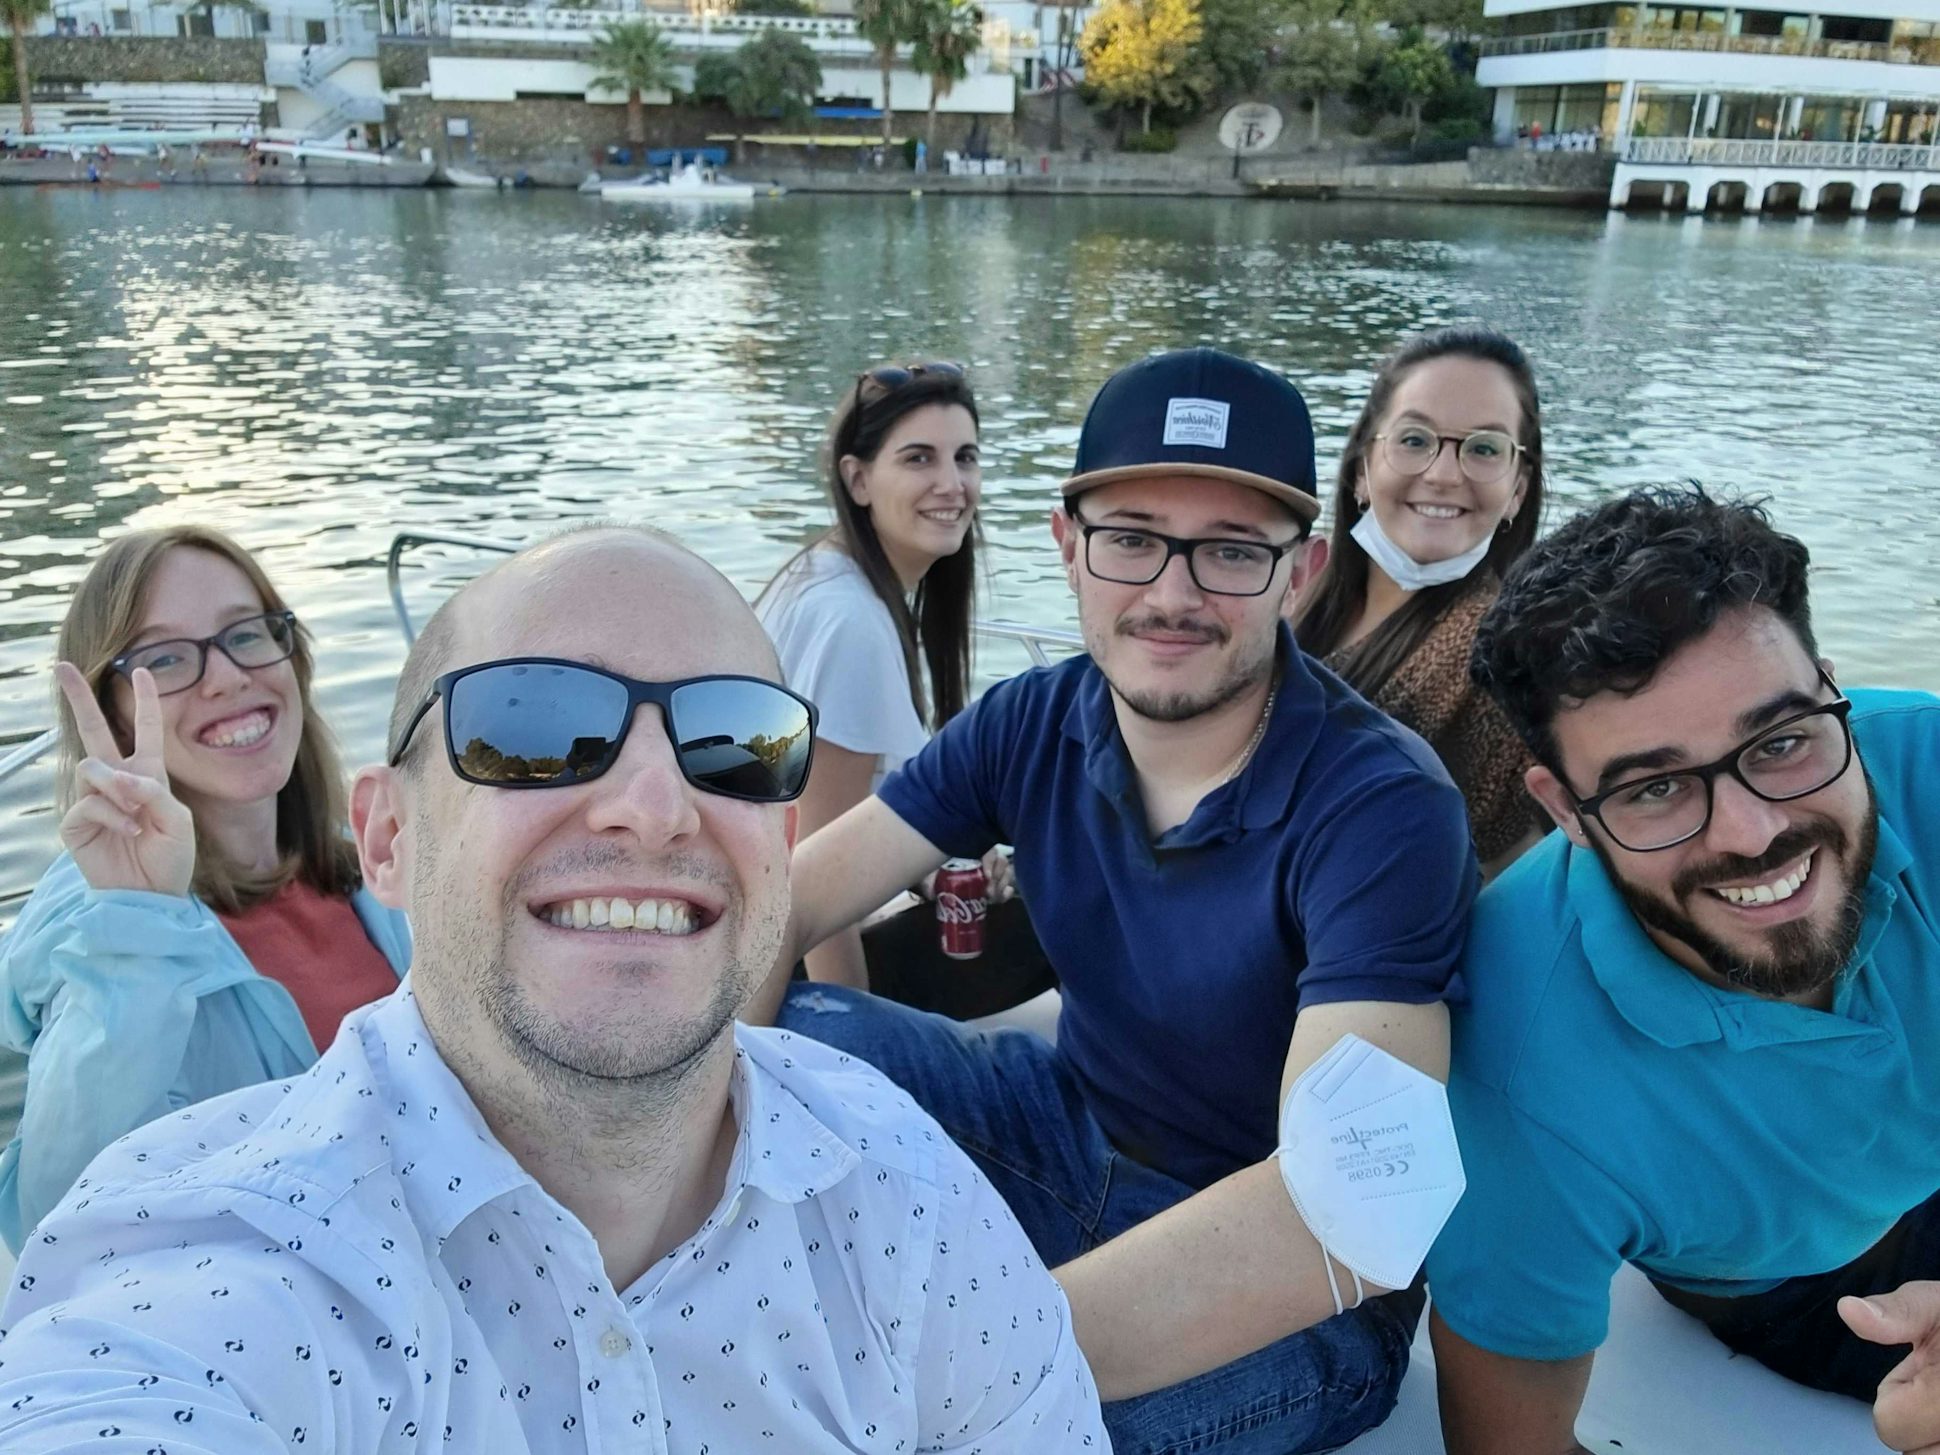 The team takes to the river to get to know each other